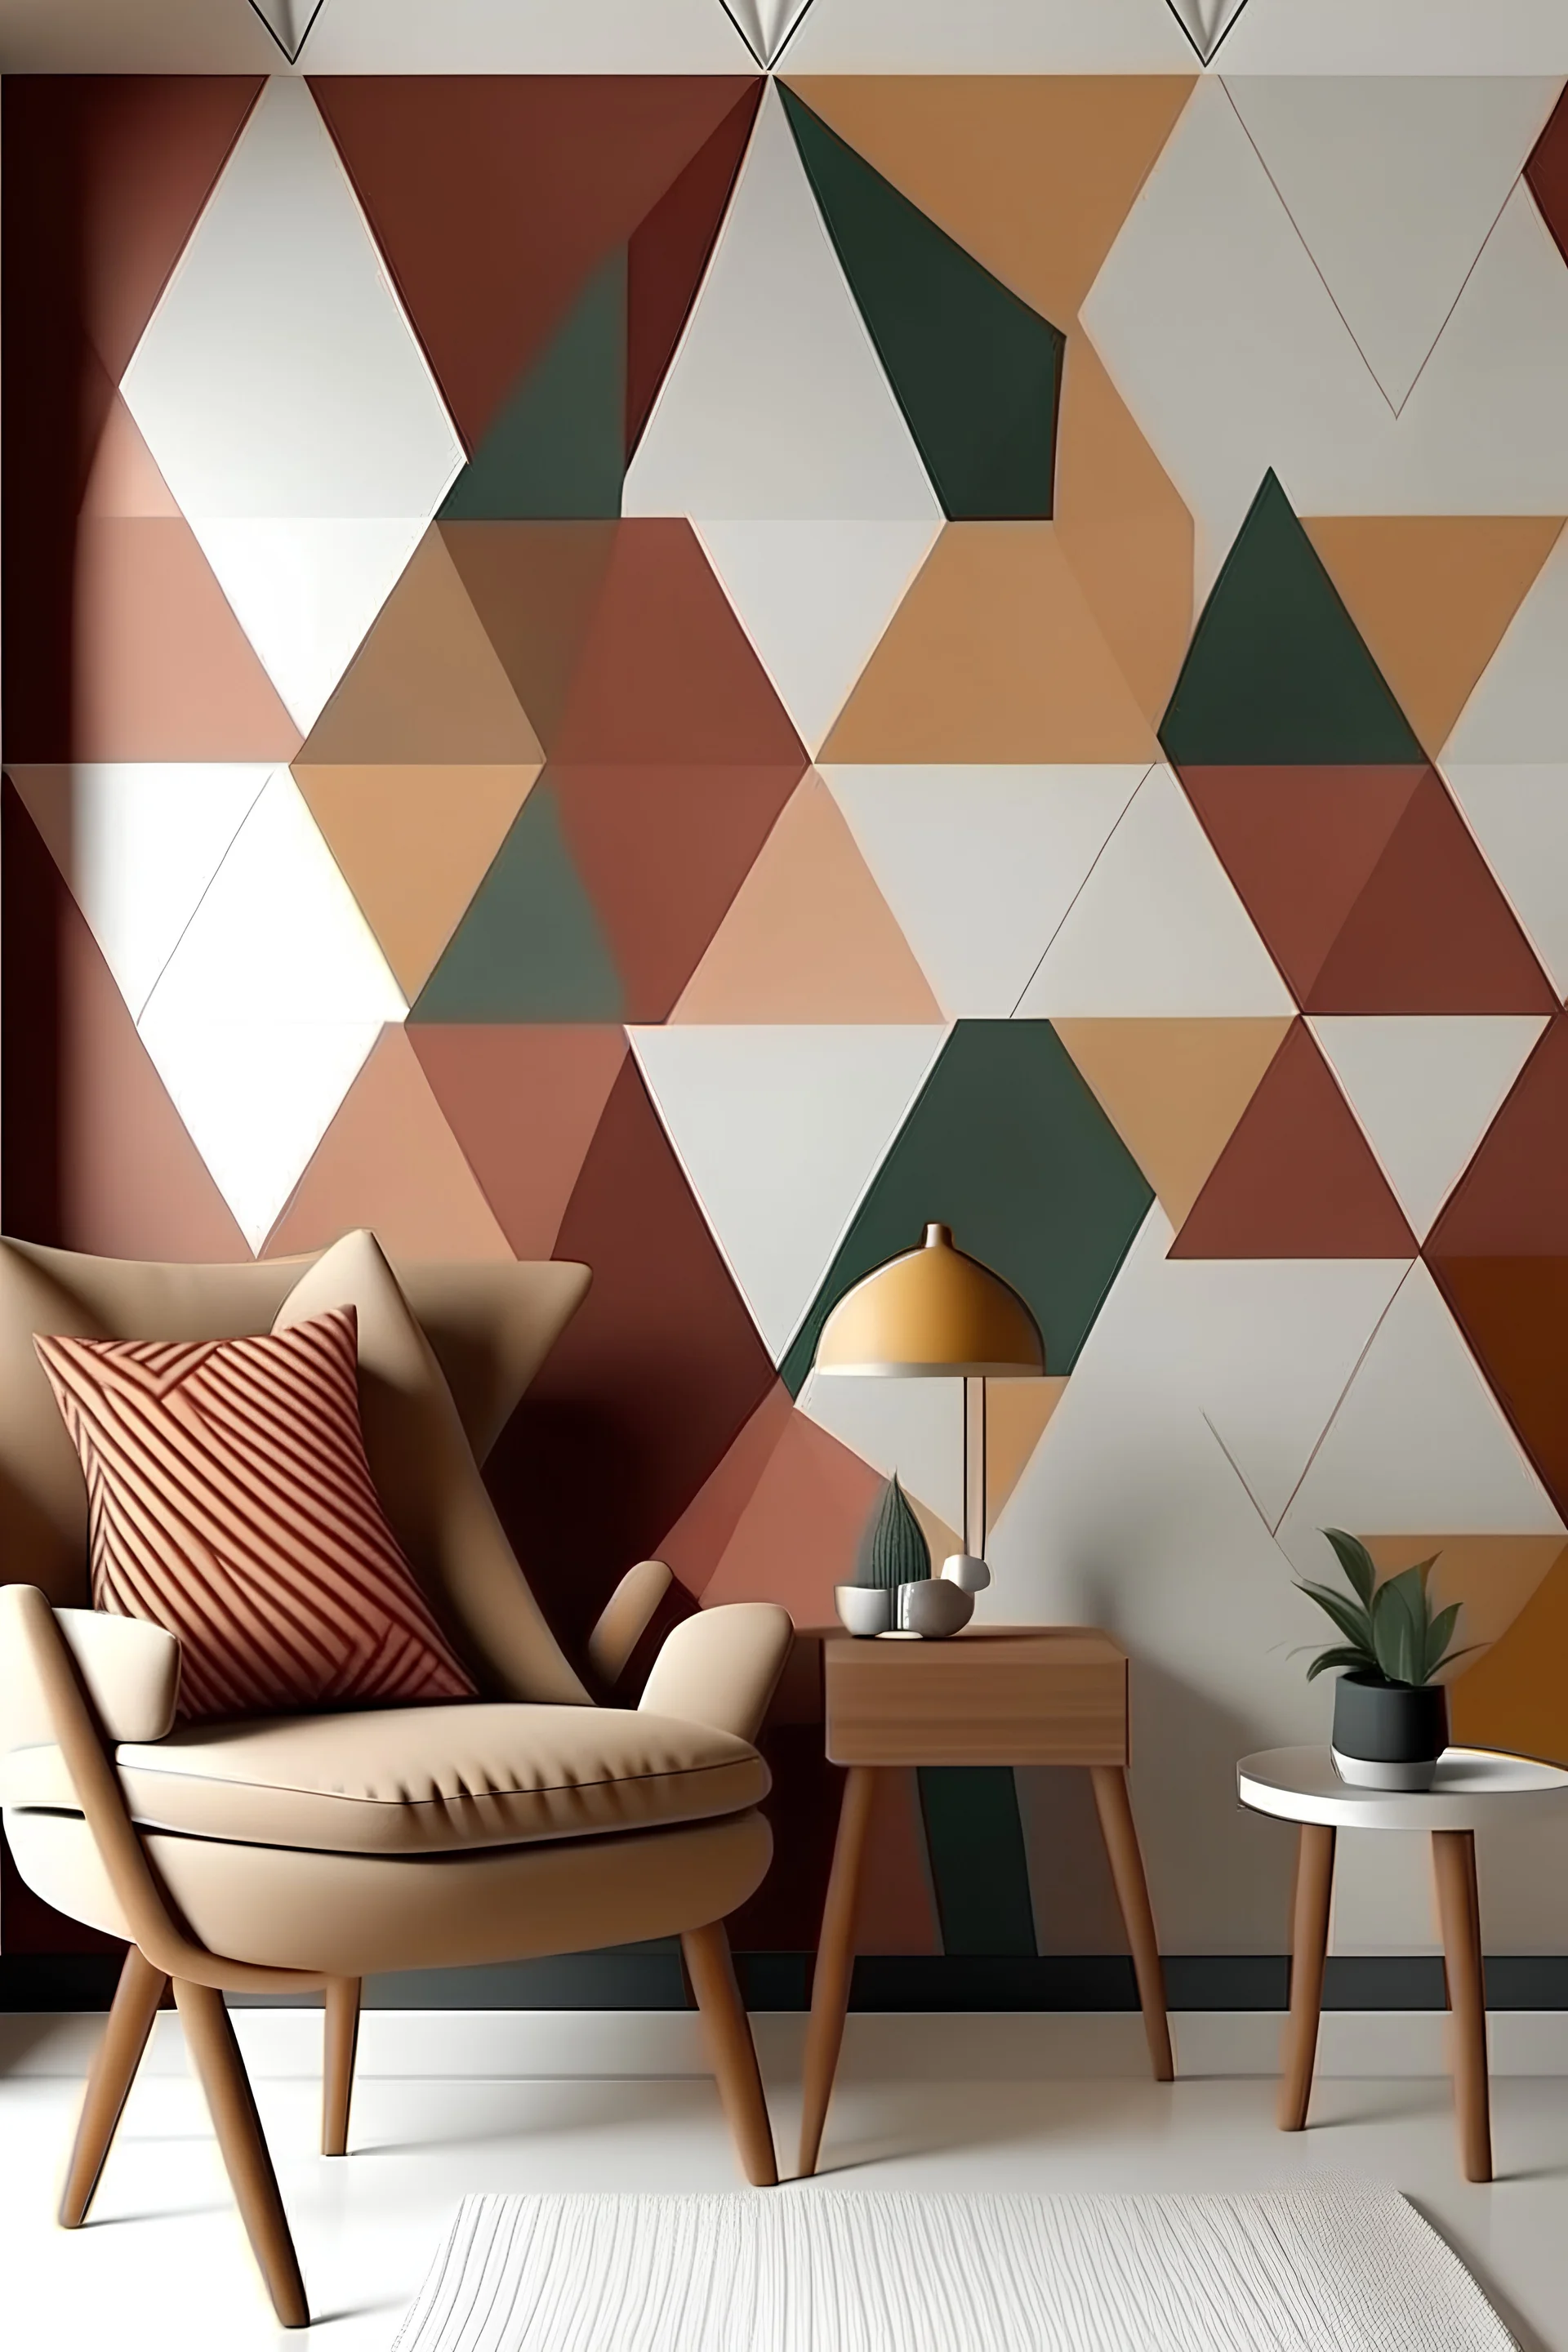 Create handpainted geometric wall mural with interlocking triangles, creating a harmonious composition using warm and grounding colors."